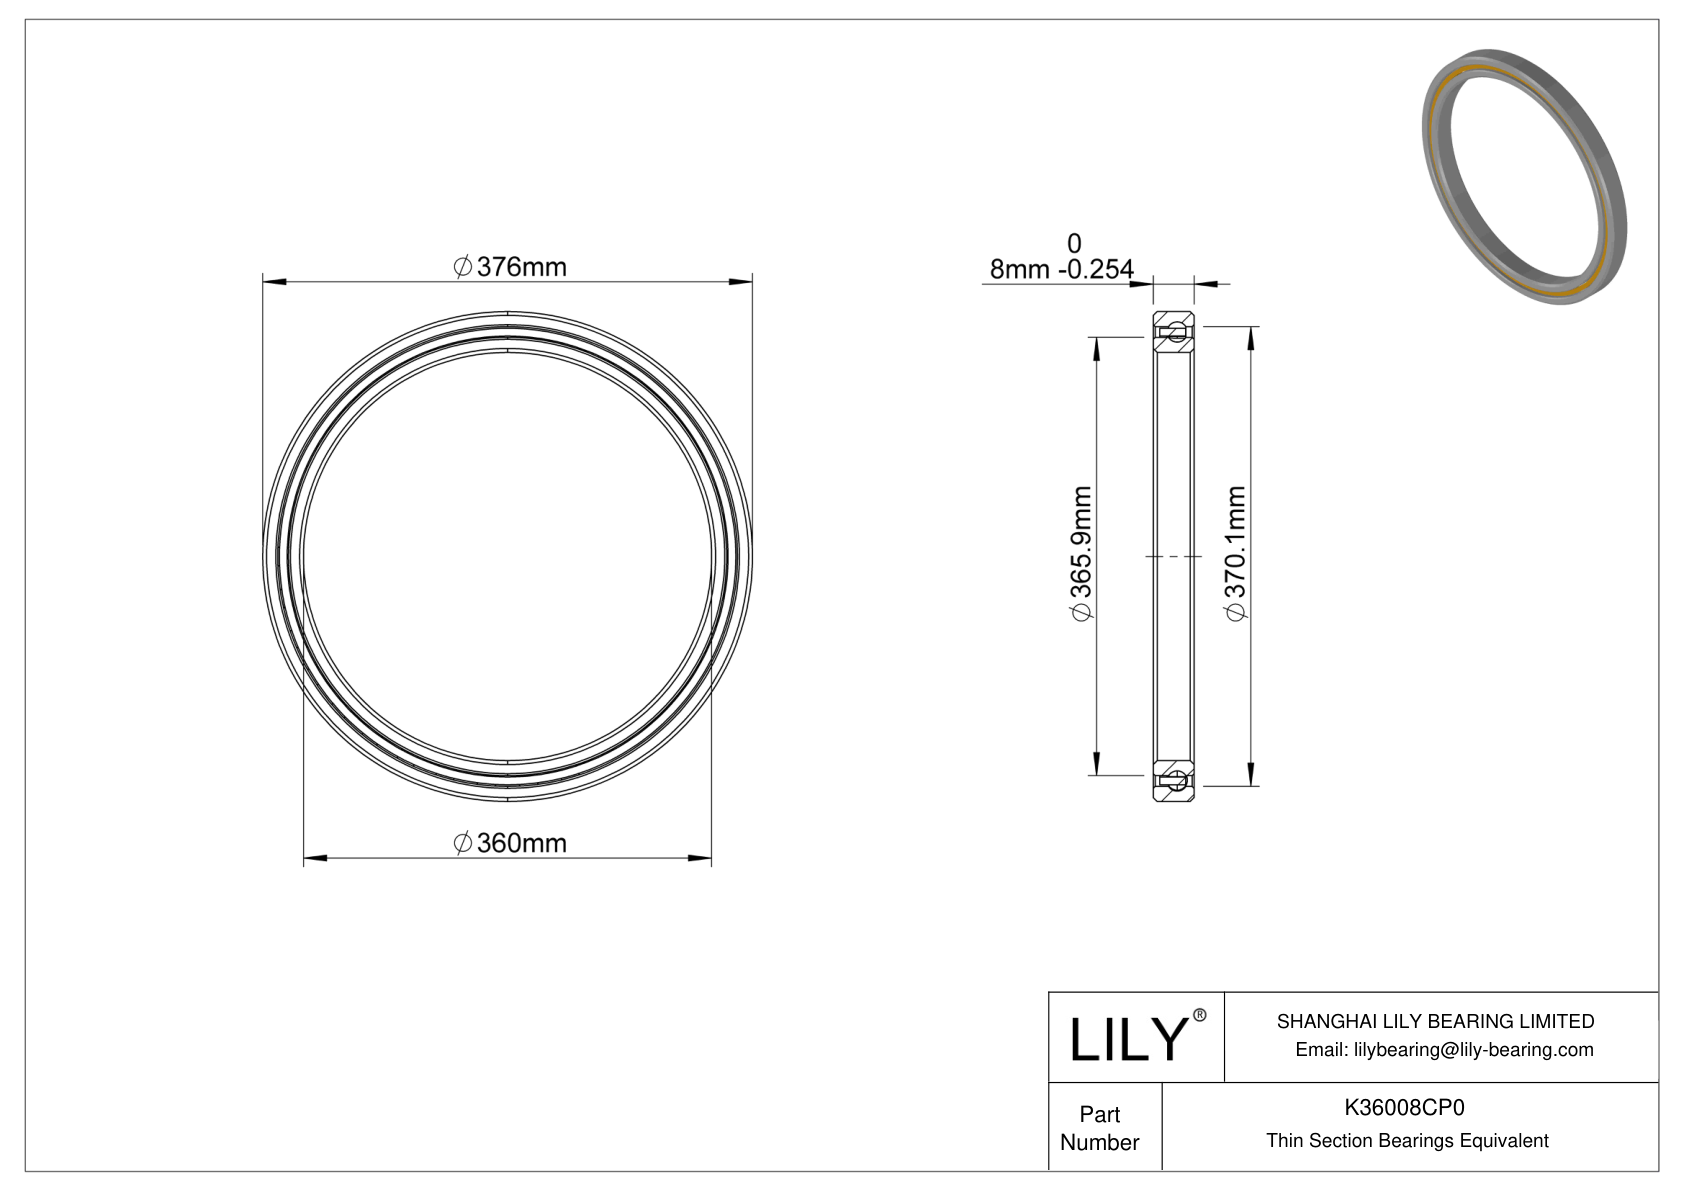 K36008CP0 Constant Section (CS) Bearings cad drawing